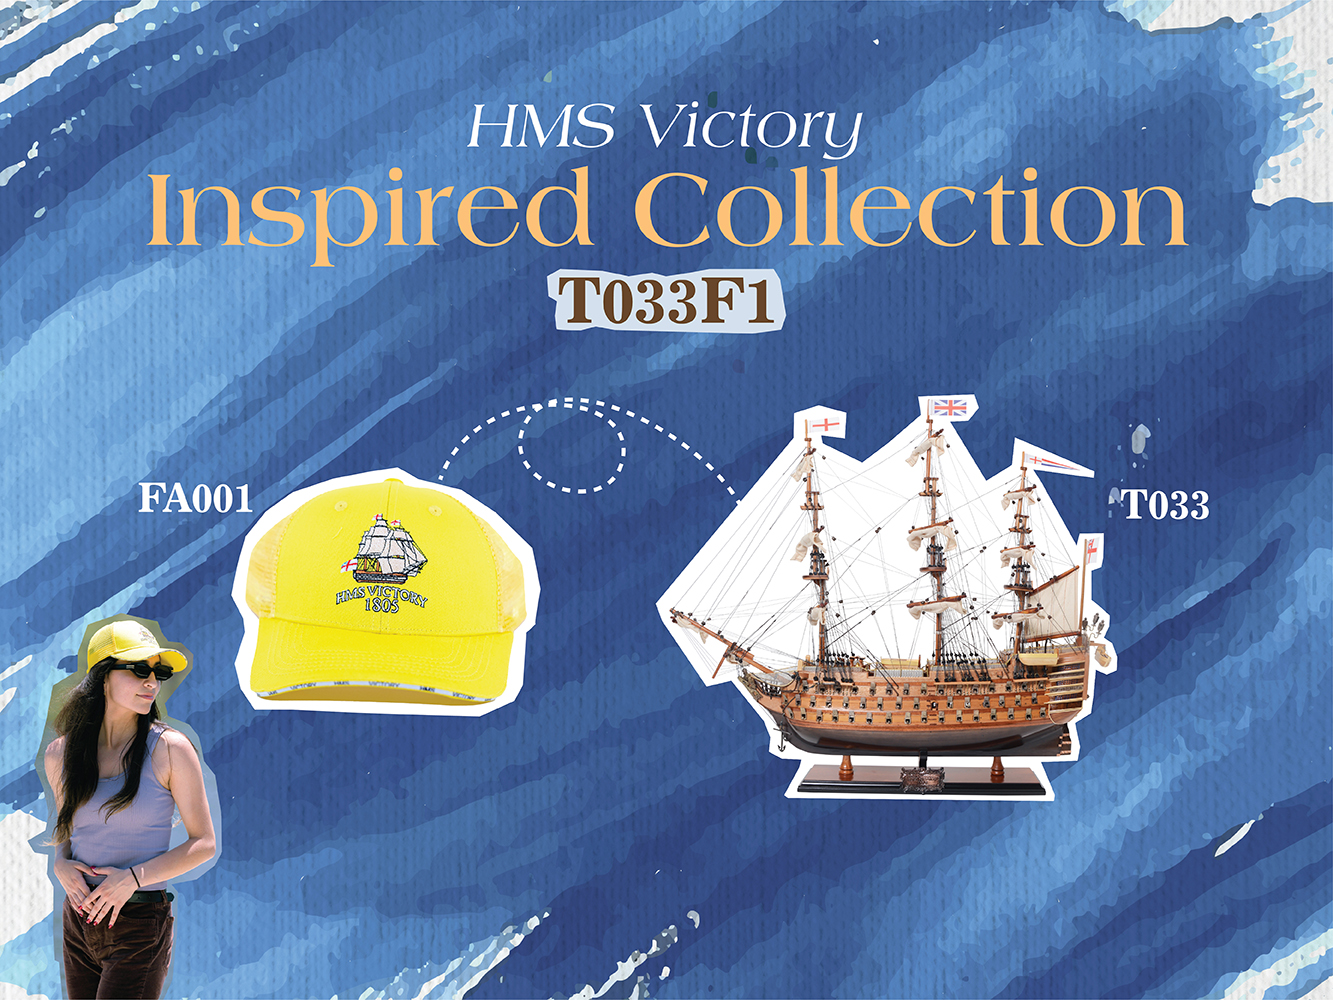 T033F1 Ultimate HMS Victory Combo: A Model Ship and Classic Hat t033f1-ultimate-hms-victory-combo-a-model-ship-and-classic-hat-l01.jpg